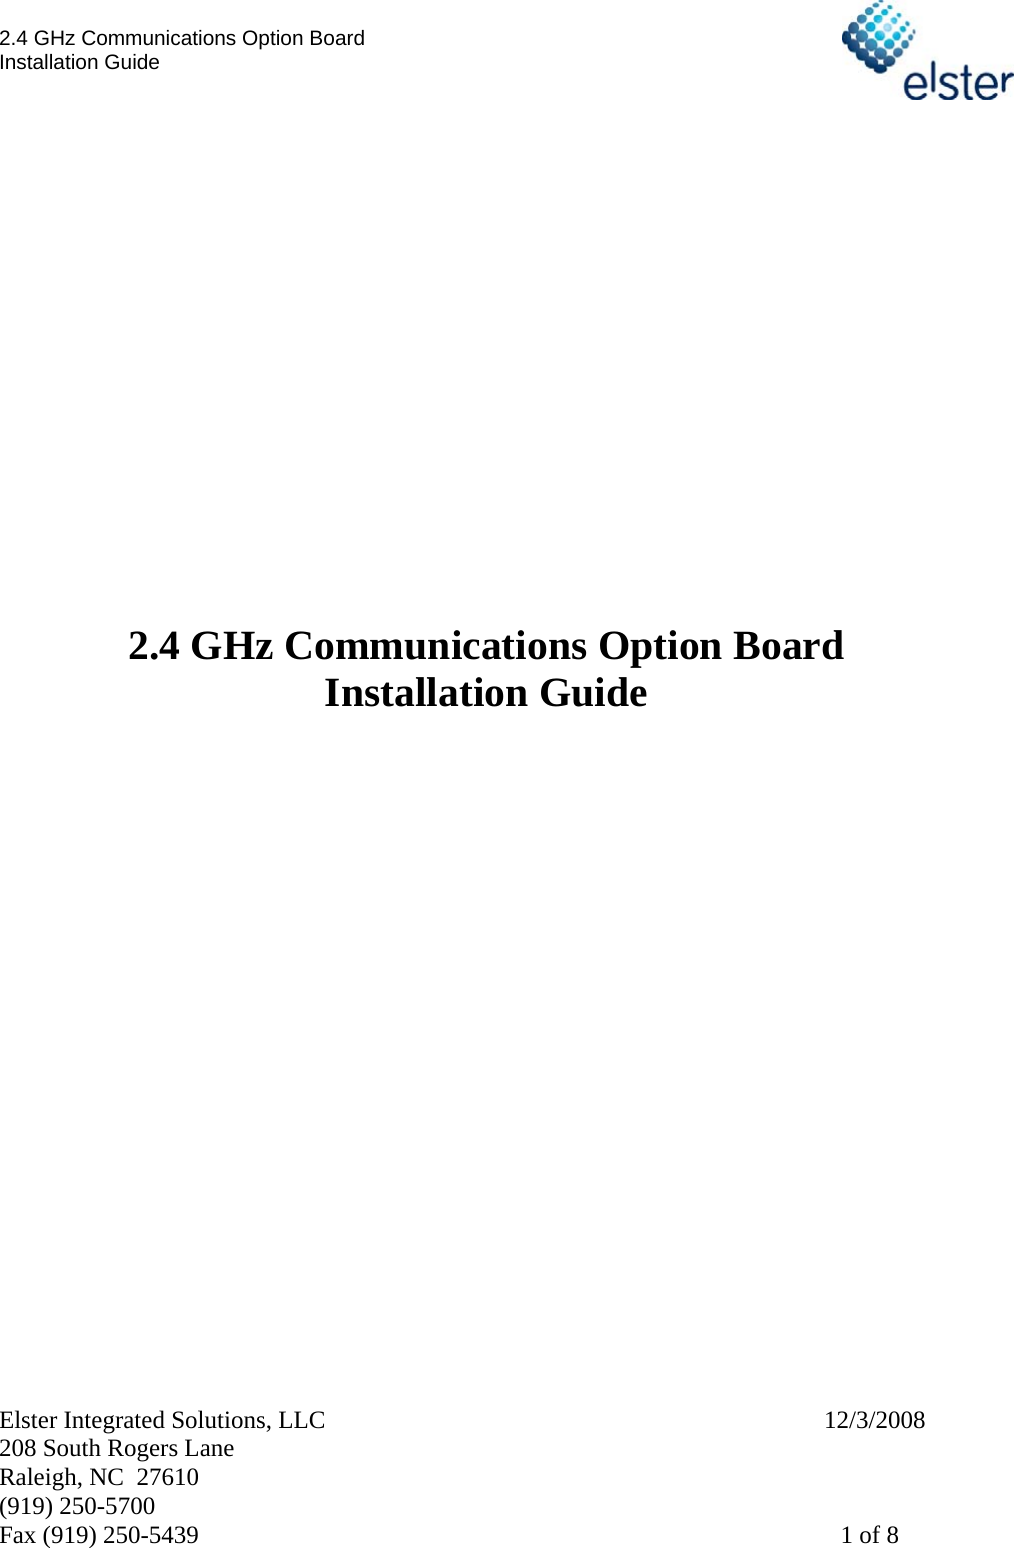 2.4 GHz Communications Option Board Installation Guide    Elster Integrated Solutions, LLC       12/3/2008 208 South Rogers Lane Raleigh, NC  27610 (919) 250-5700 Fax (919) 250-5439    1 of 8                   2.4 GHz Communications Option Board Installation Guide                        